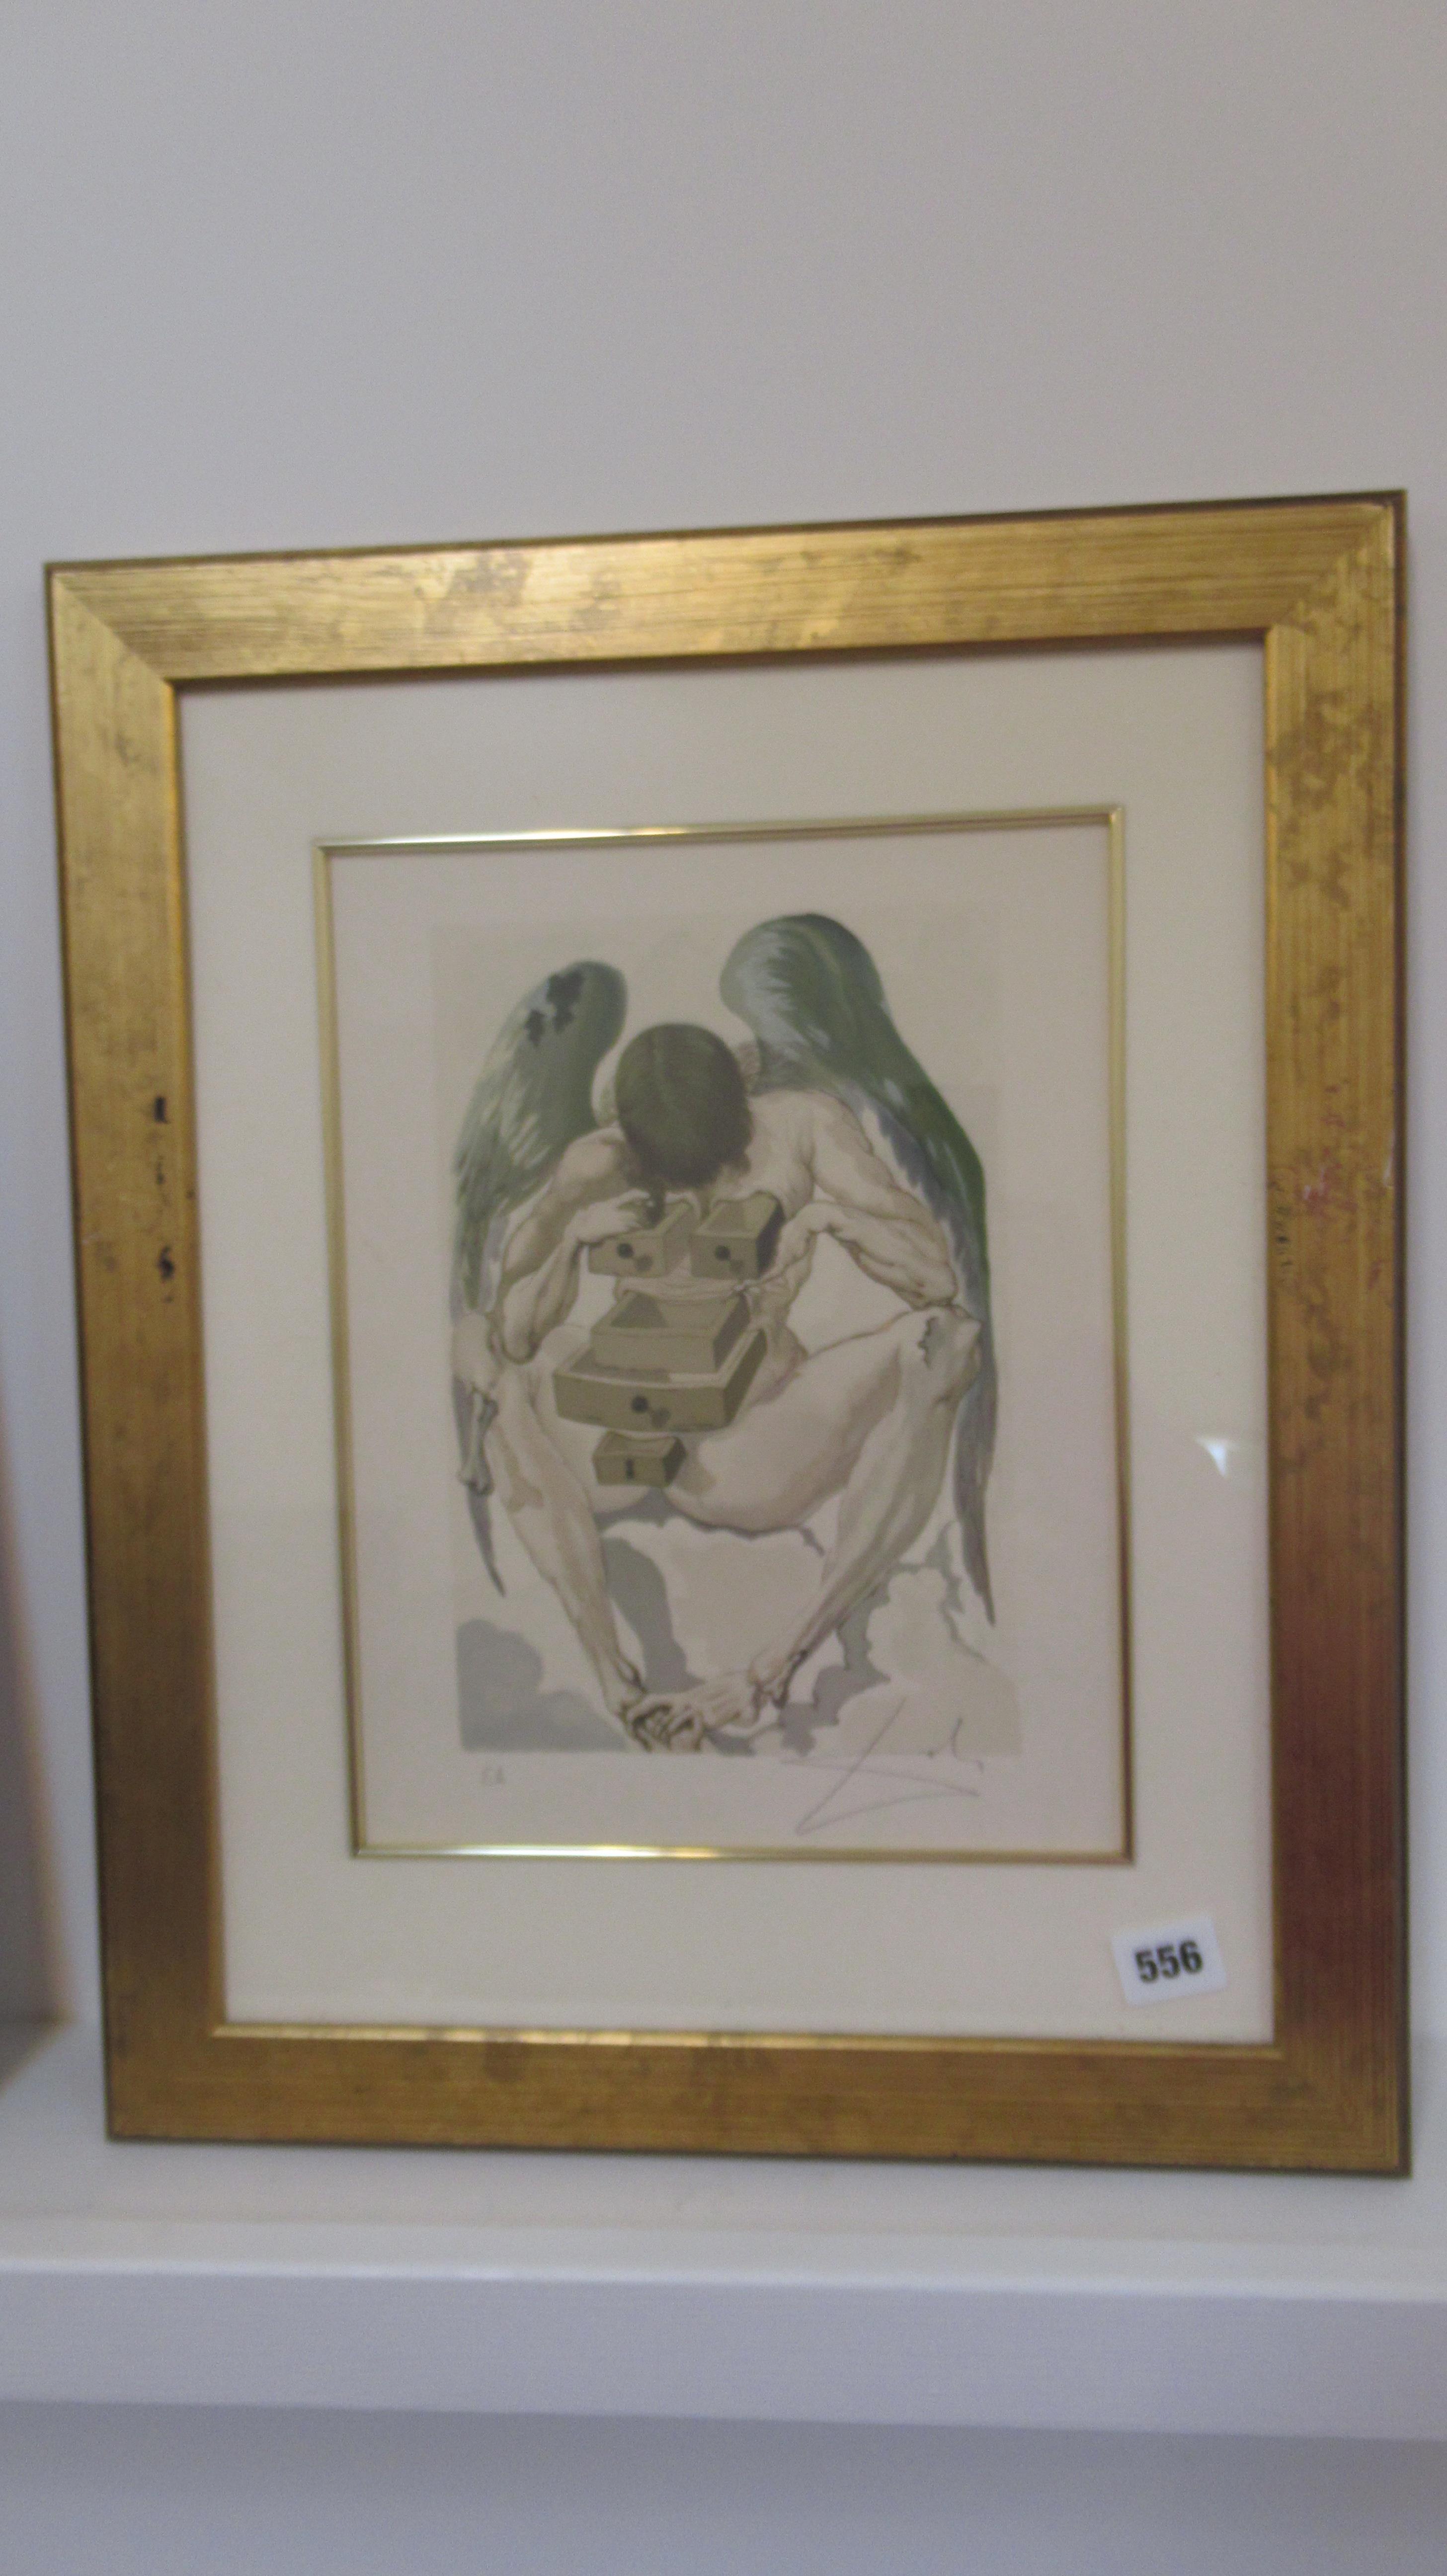 A Salvador Dali signed print - The Reign of the Penitents Purgatory #1 - 26cm x 17cm - in a gilt fr